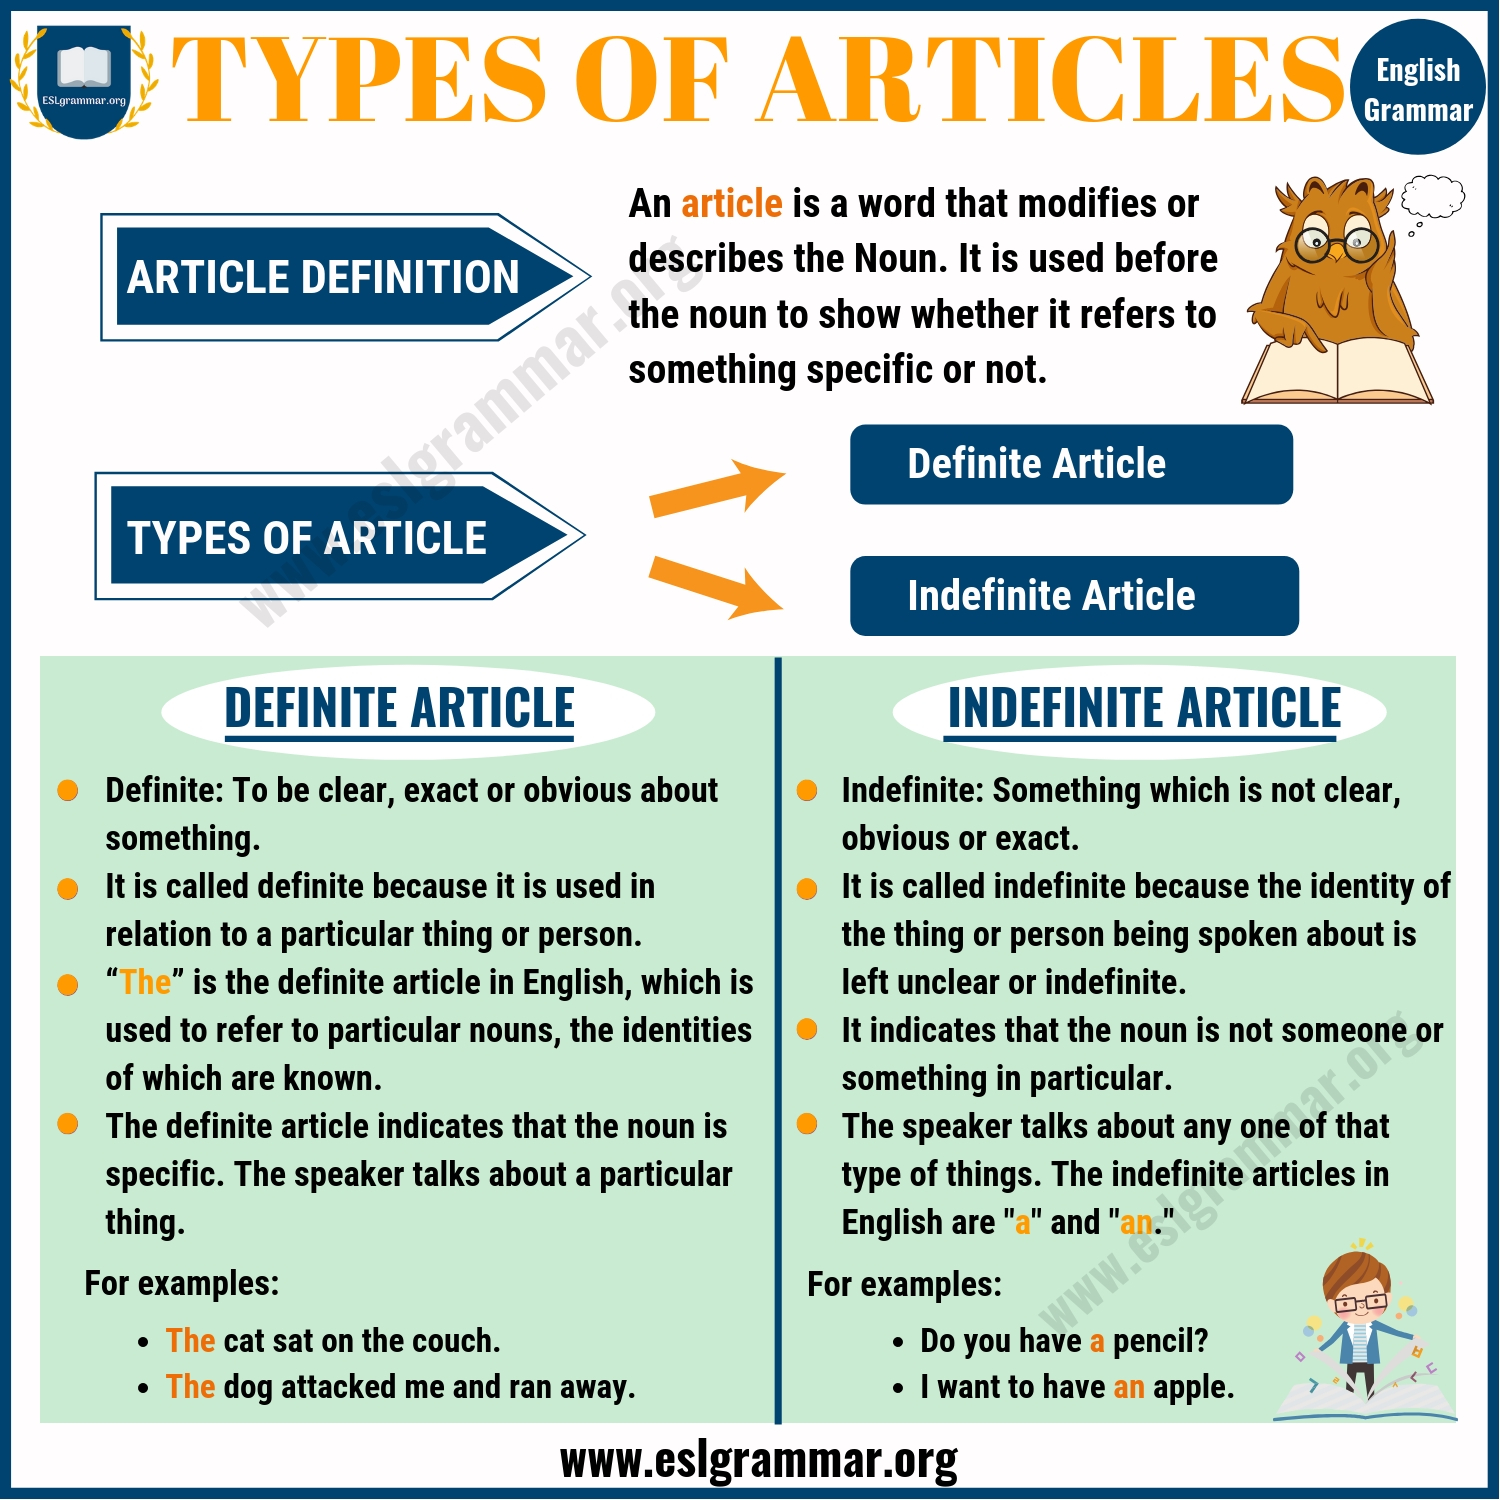 Click on: TYPES OF ARTICLES